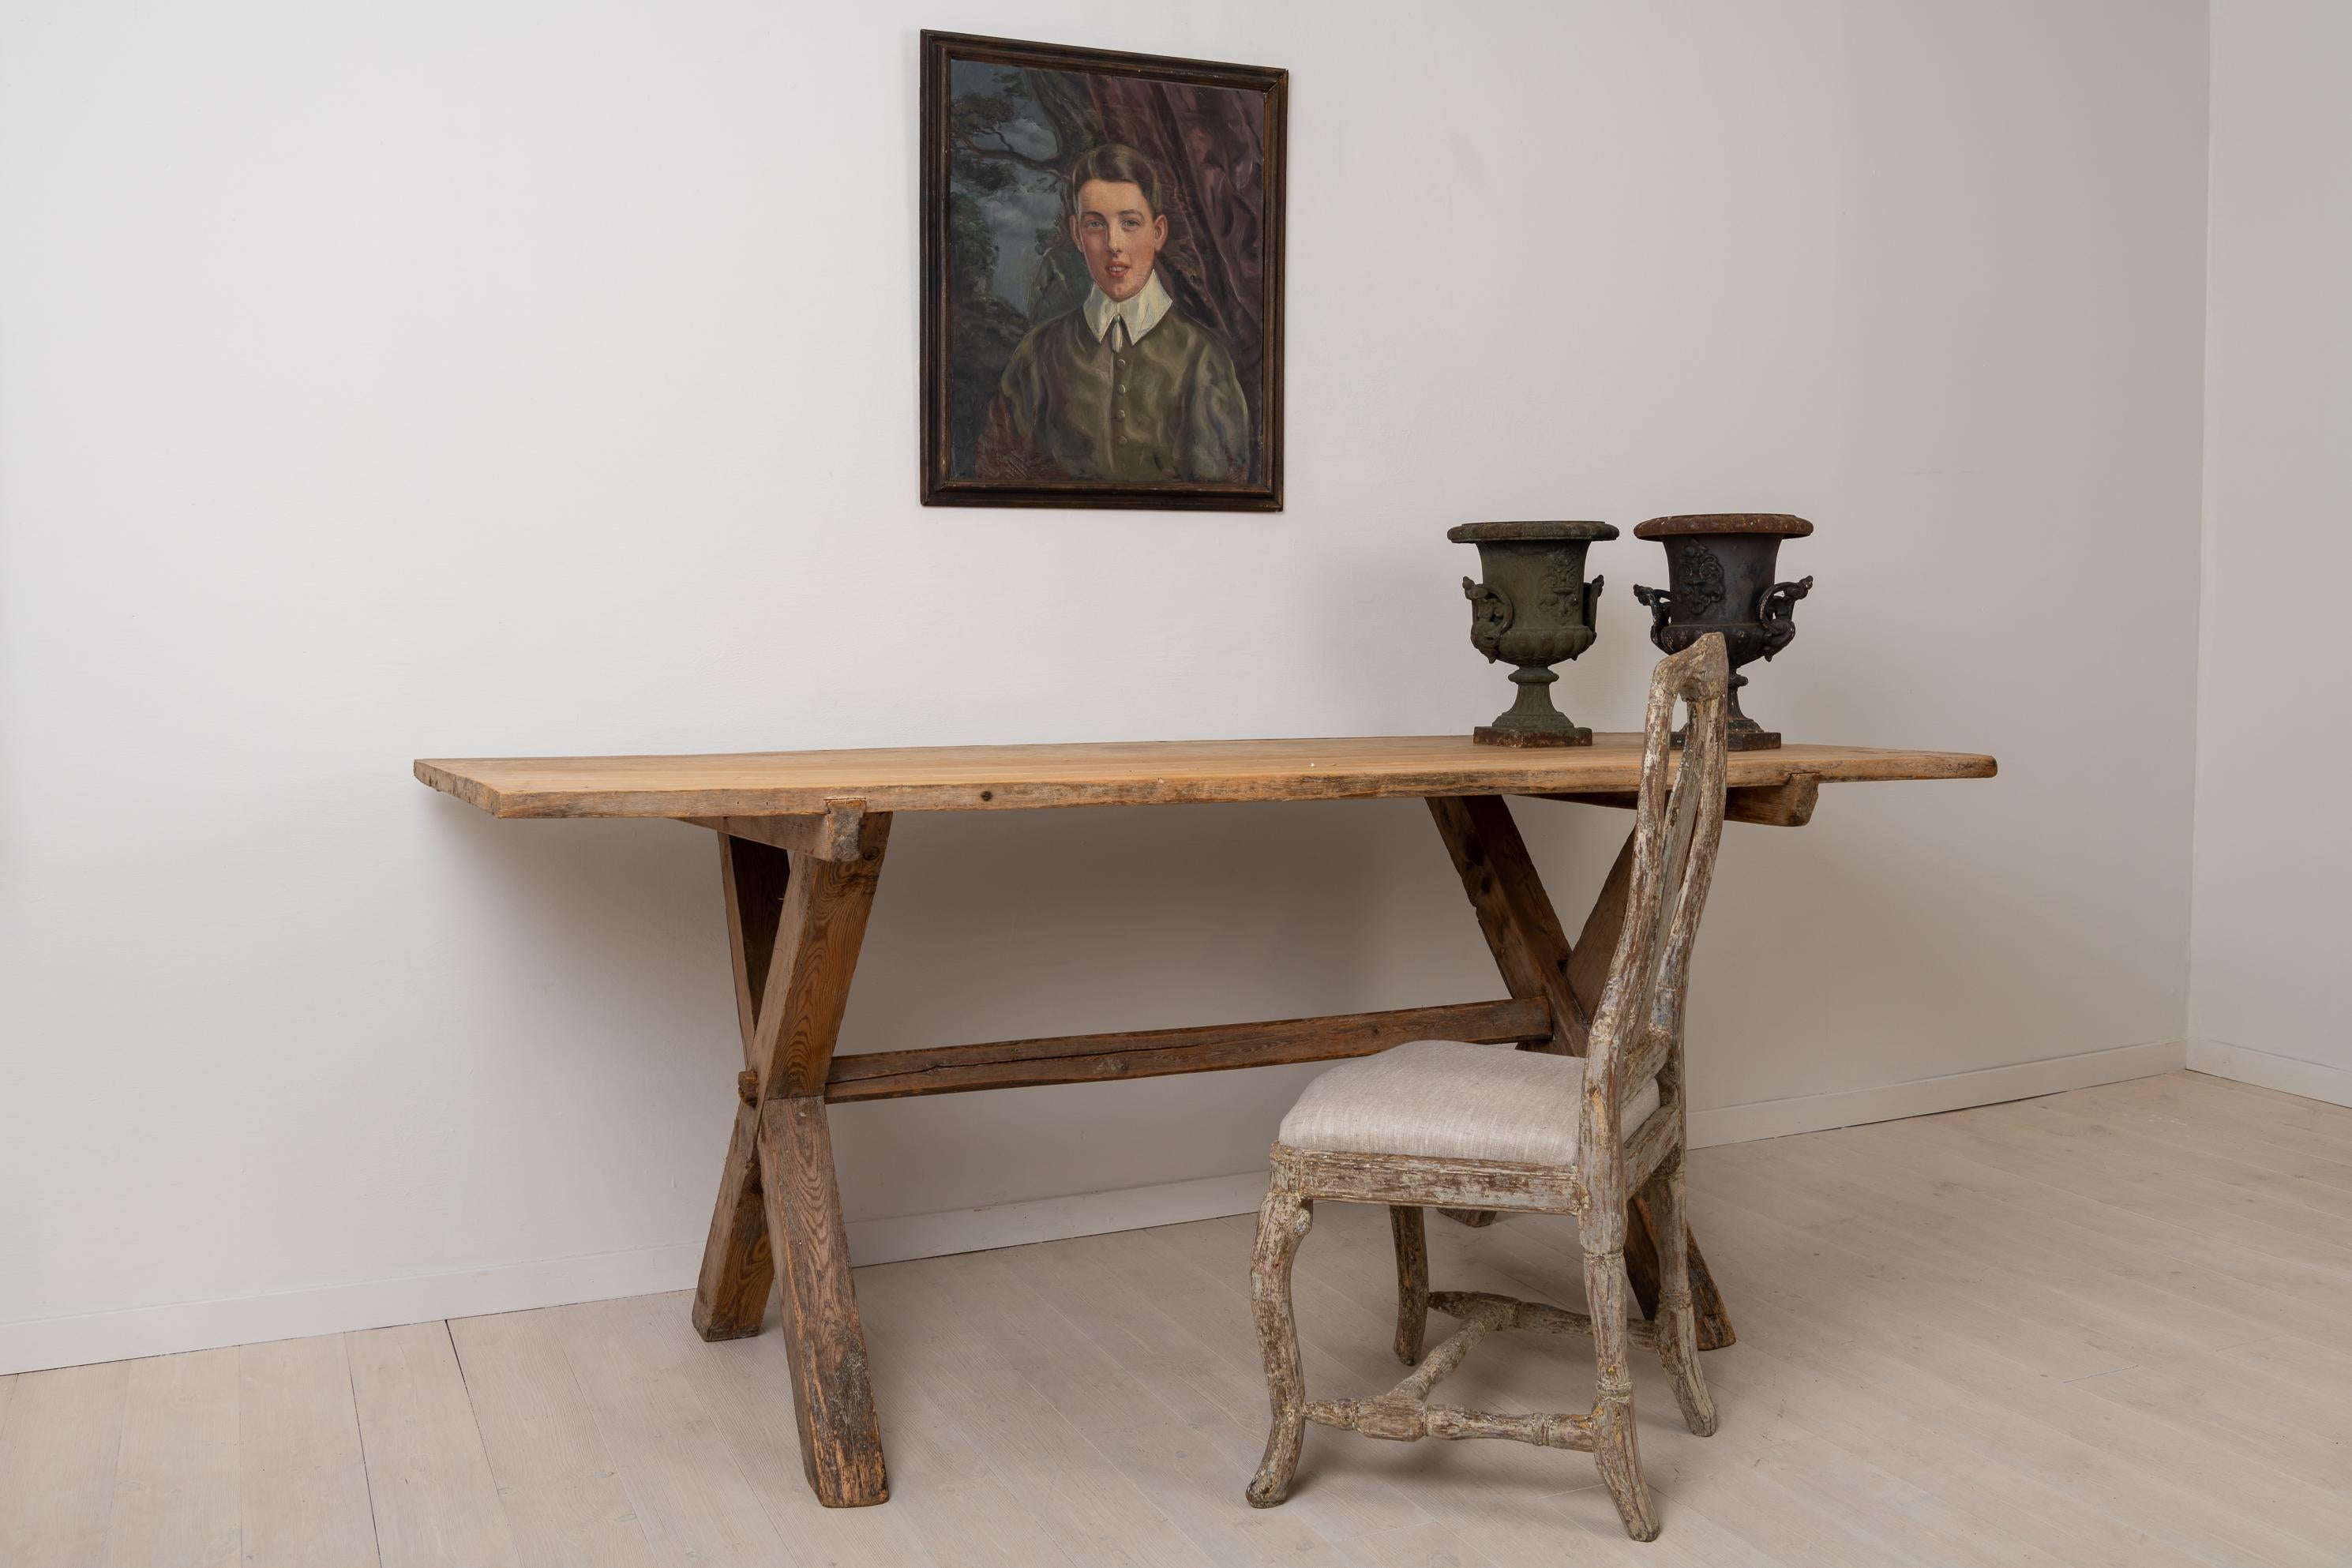 Large Swedish pine table from the late 1700s. The table is rustic and primitive with clean and lightly patinated surfaces on both the table top and X-base. The table top consists of two large boards and is detached from the legs. Underneath the